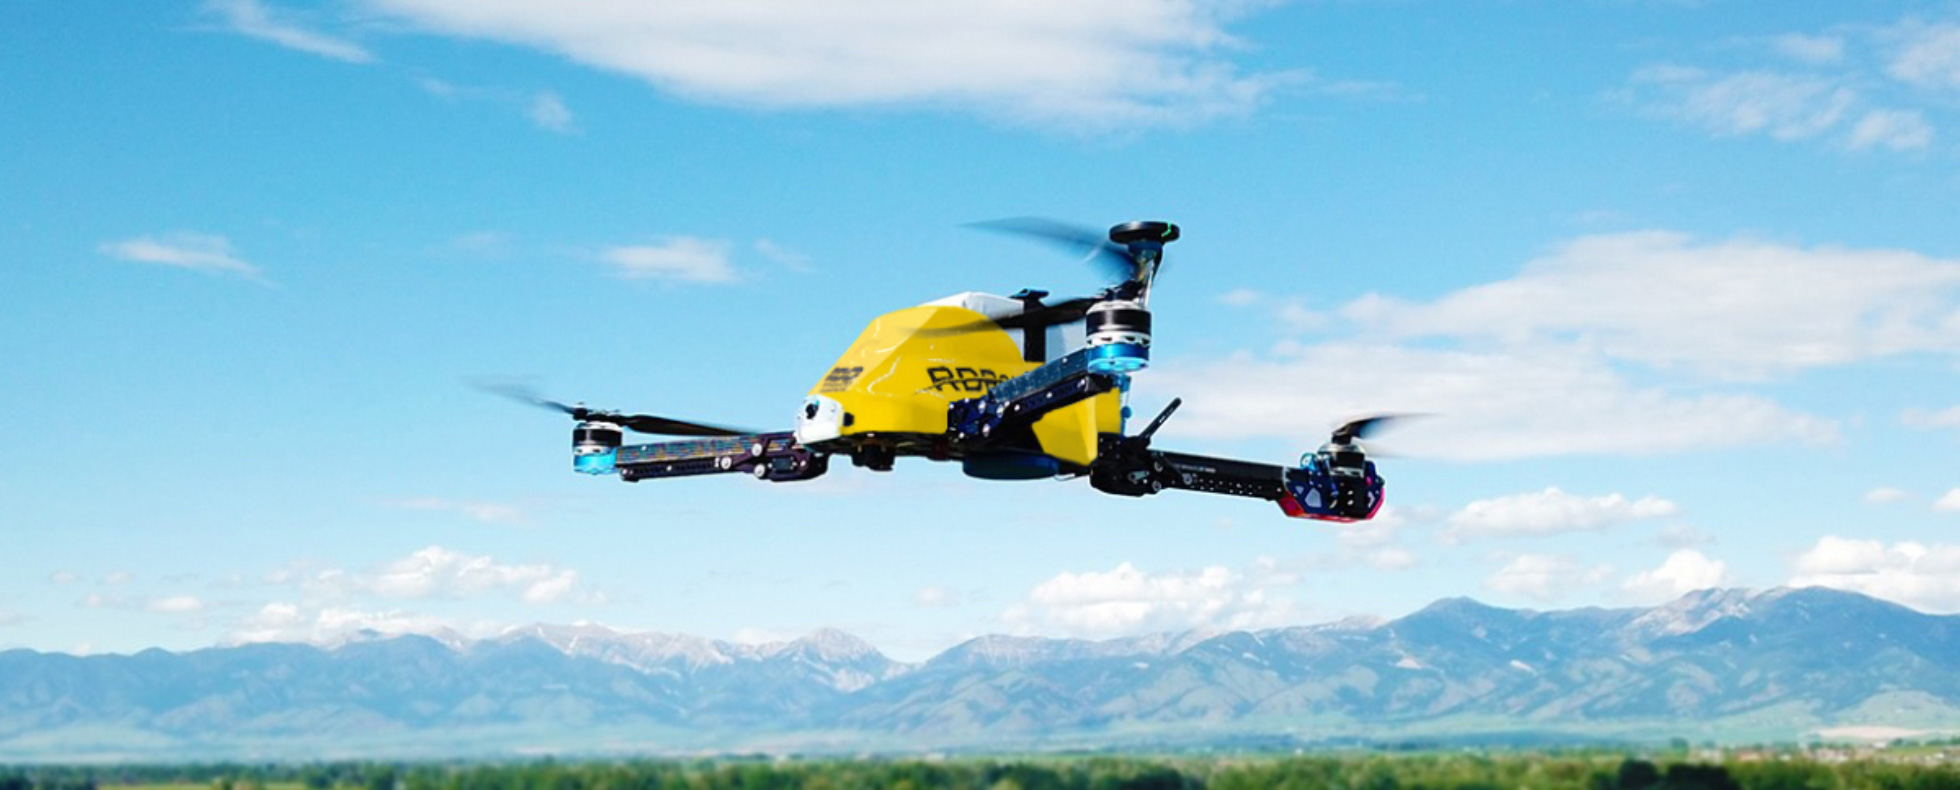 RDO Integrated Controls and Vision Aerial Partner on RDR Series Drones